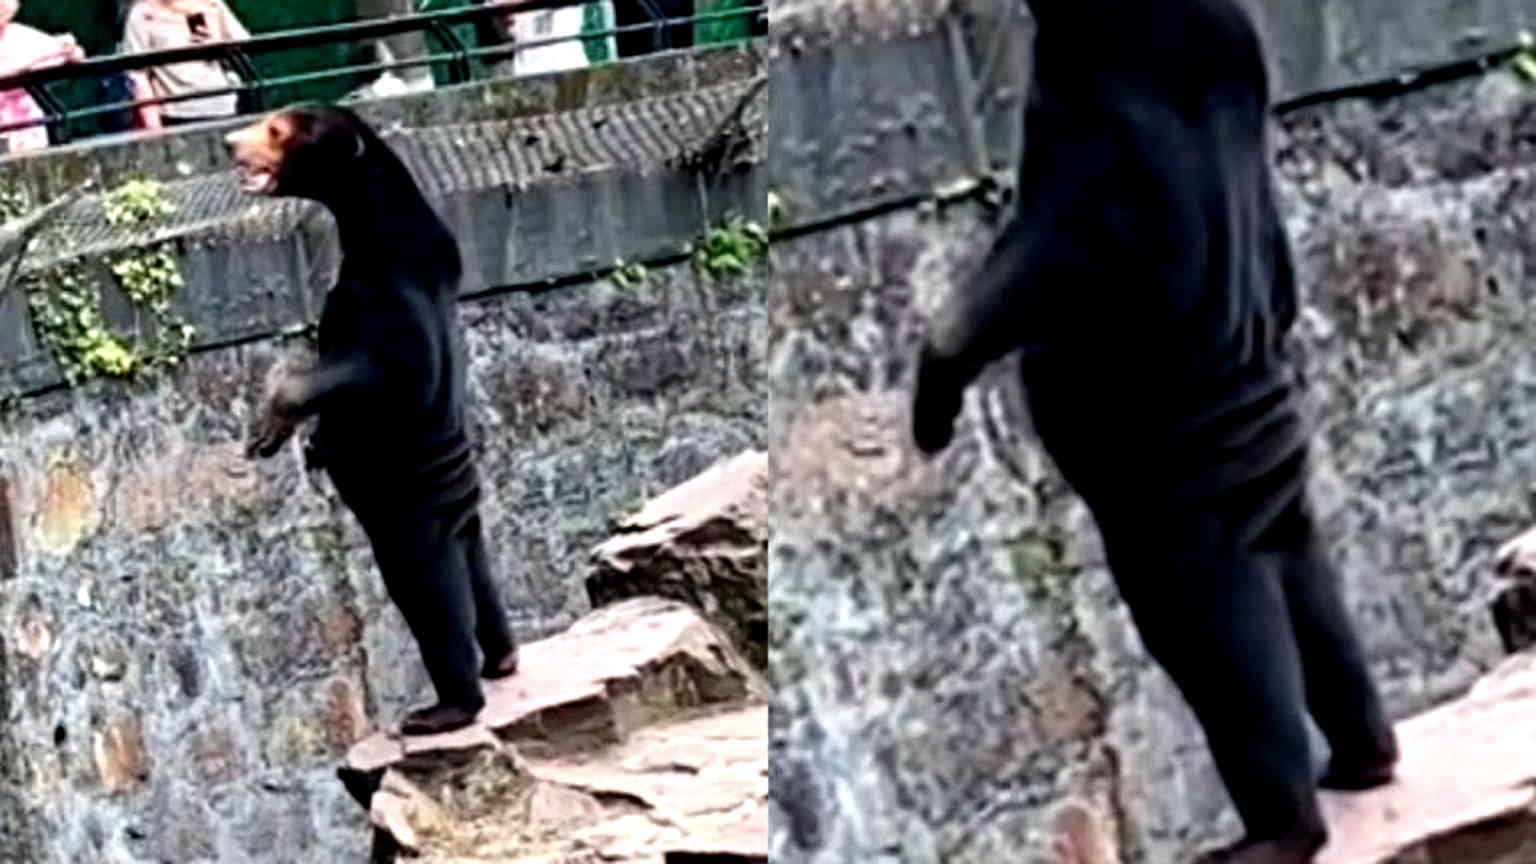 Chinese zoo denies its bears are ‘humans in disguise’ after ‘suspicious’ photos and videos